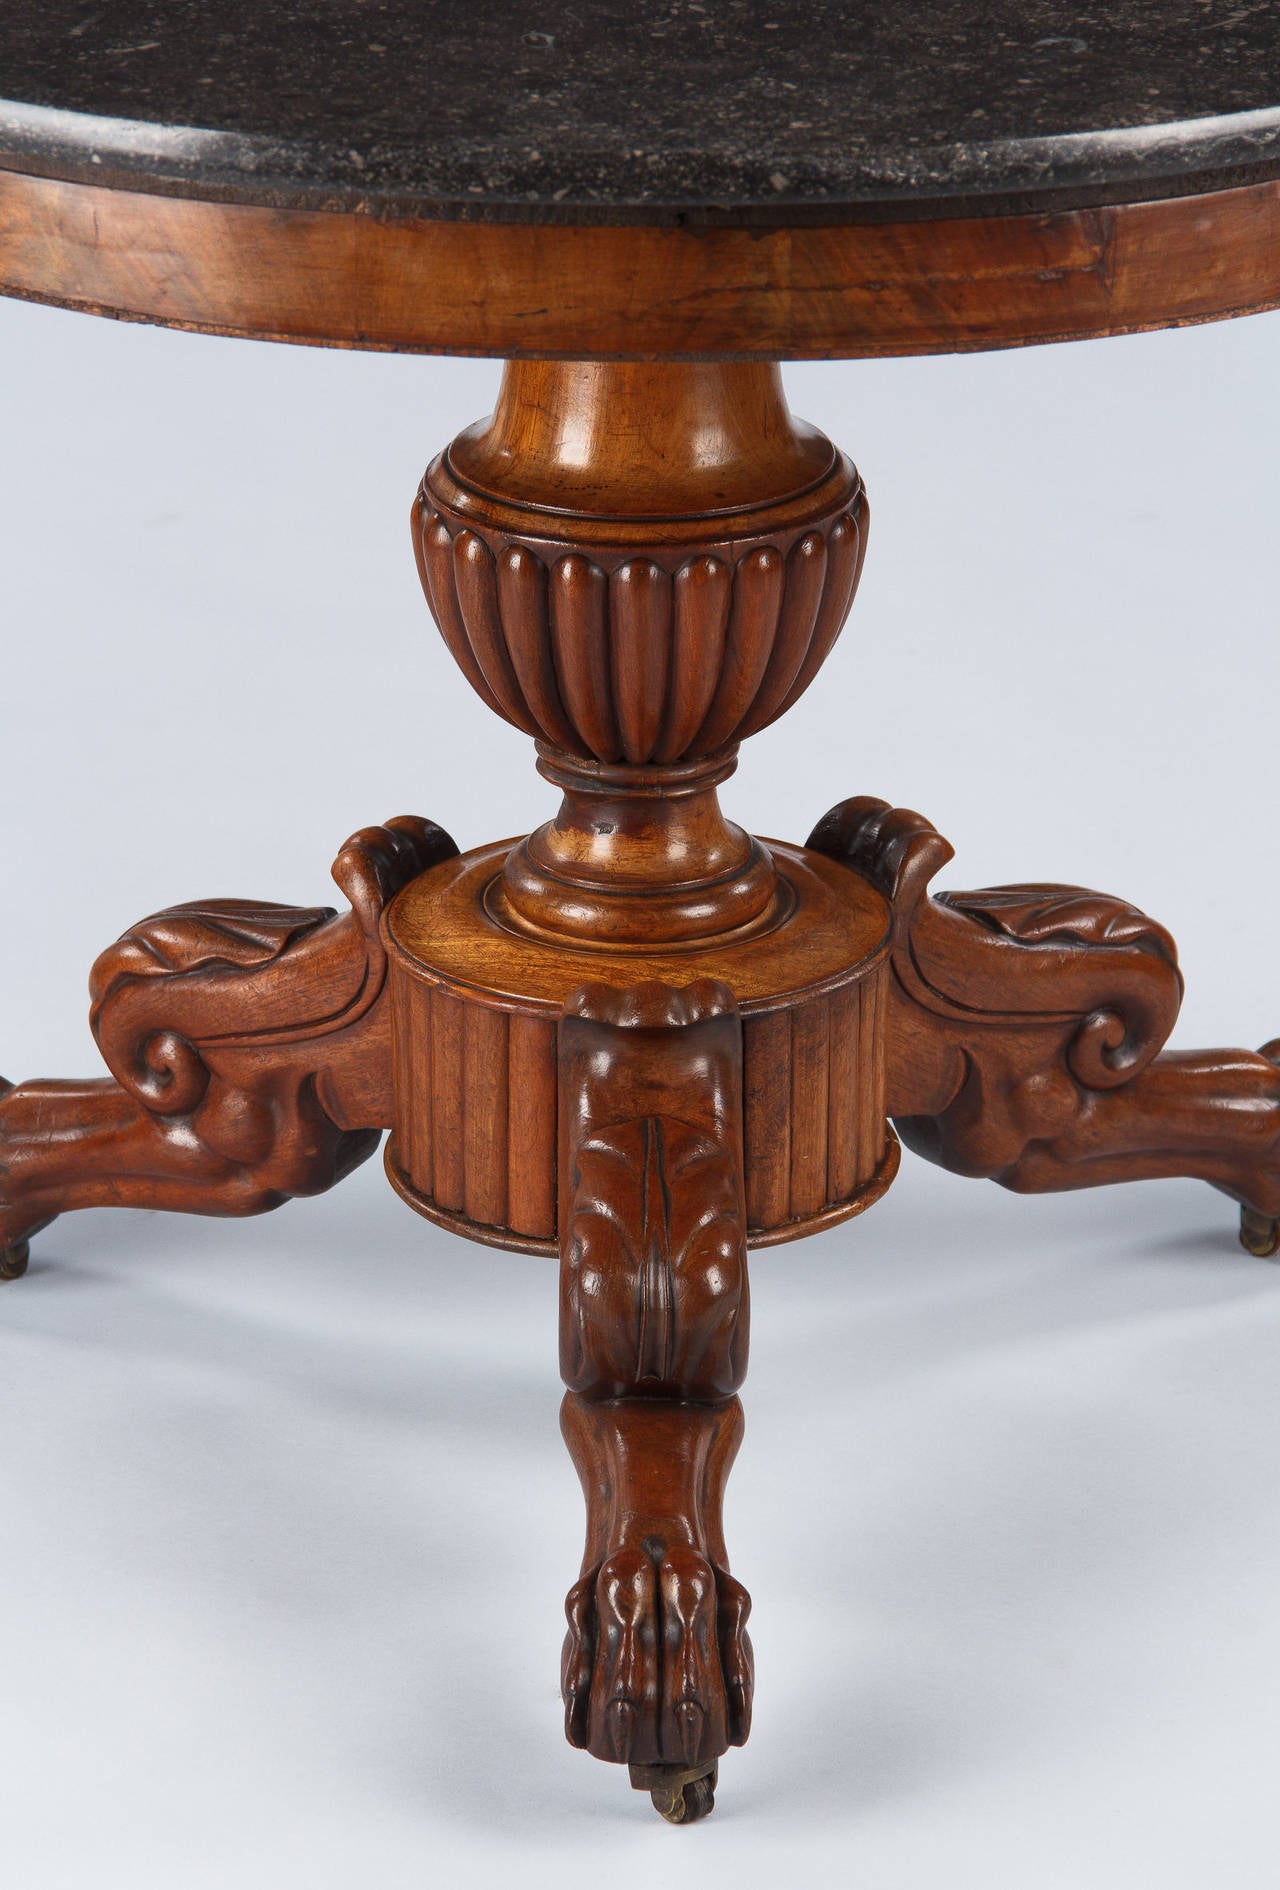 A wonderful pedestal table or gueridon from the Napoleon III period, circa 1870s. Found in a private home in the Loire Region, this center table is topped with a round black marble top. The walnut wood tripod base features a gadrooning bulb in its